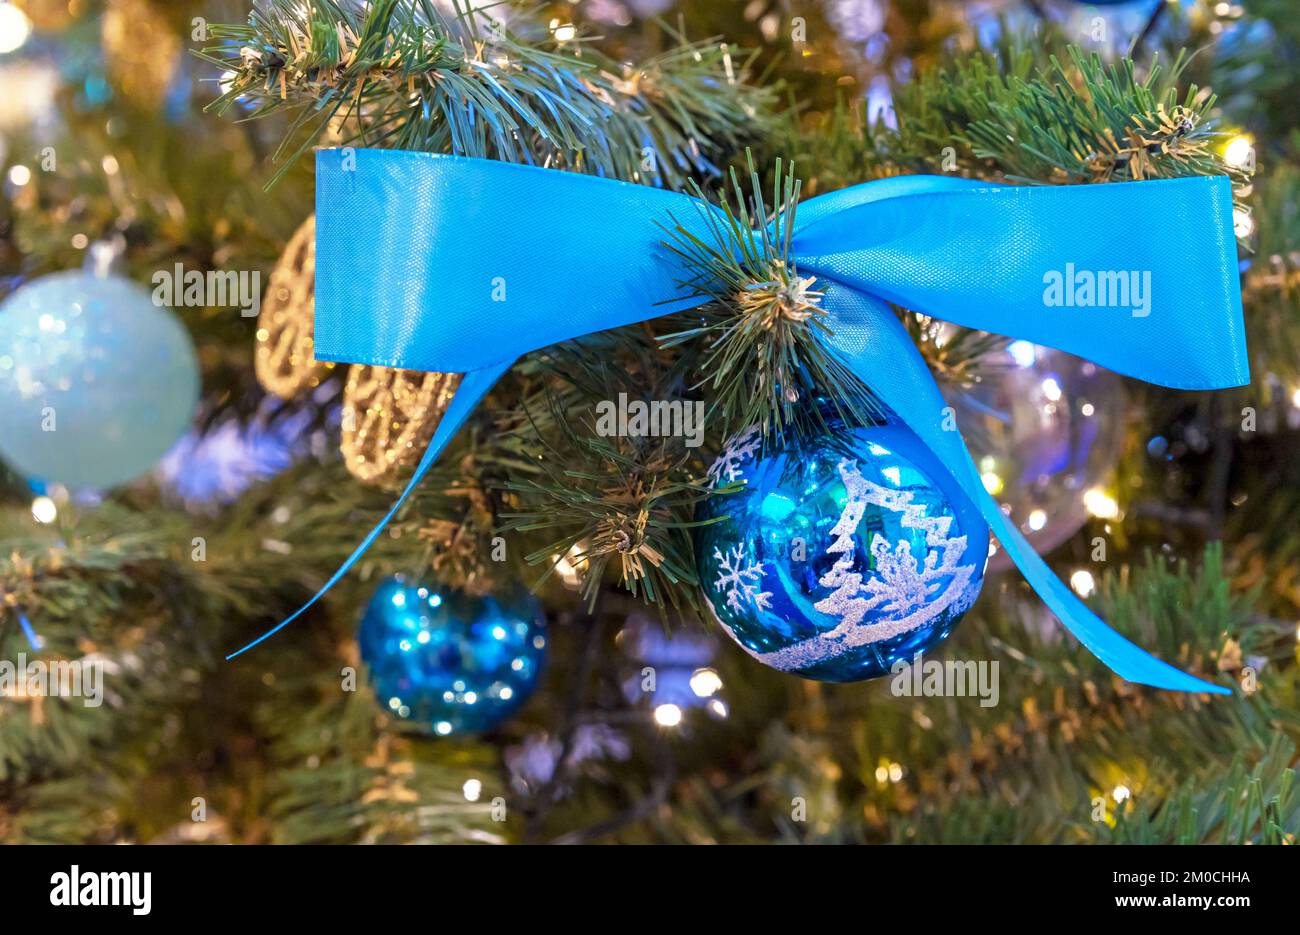 Blue Christmas ball with a blue satin ribbon on the Christmas tree. Stock Photo